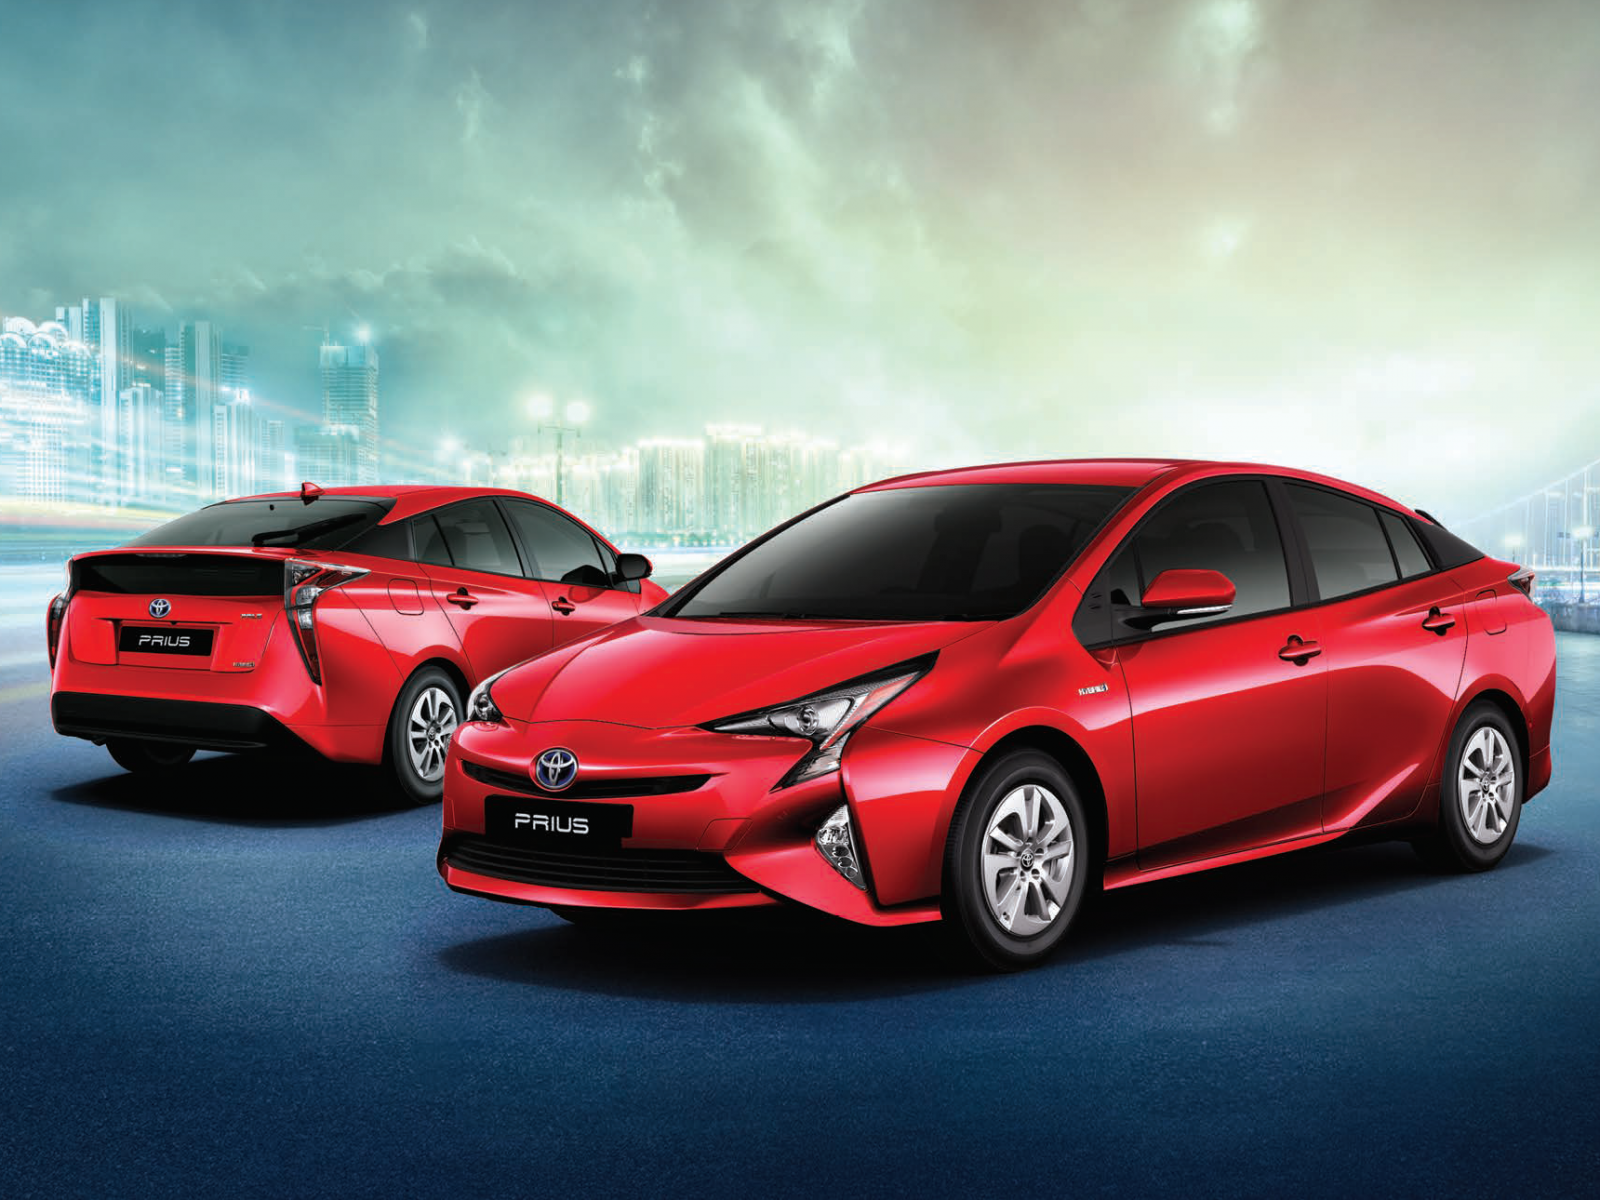 Download - Prius Singapore , HD Wallpaper & Backgrounds